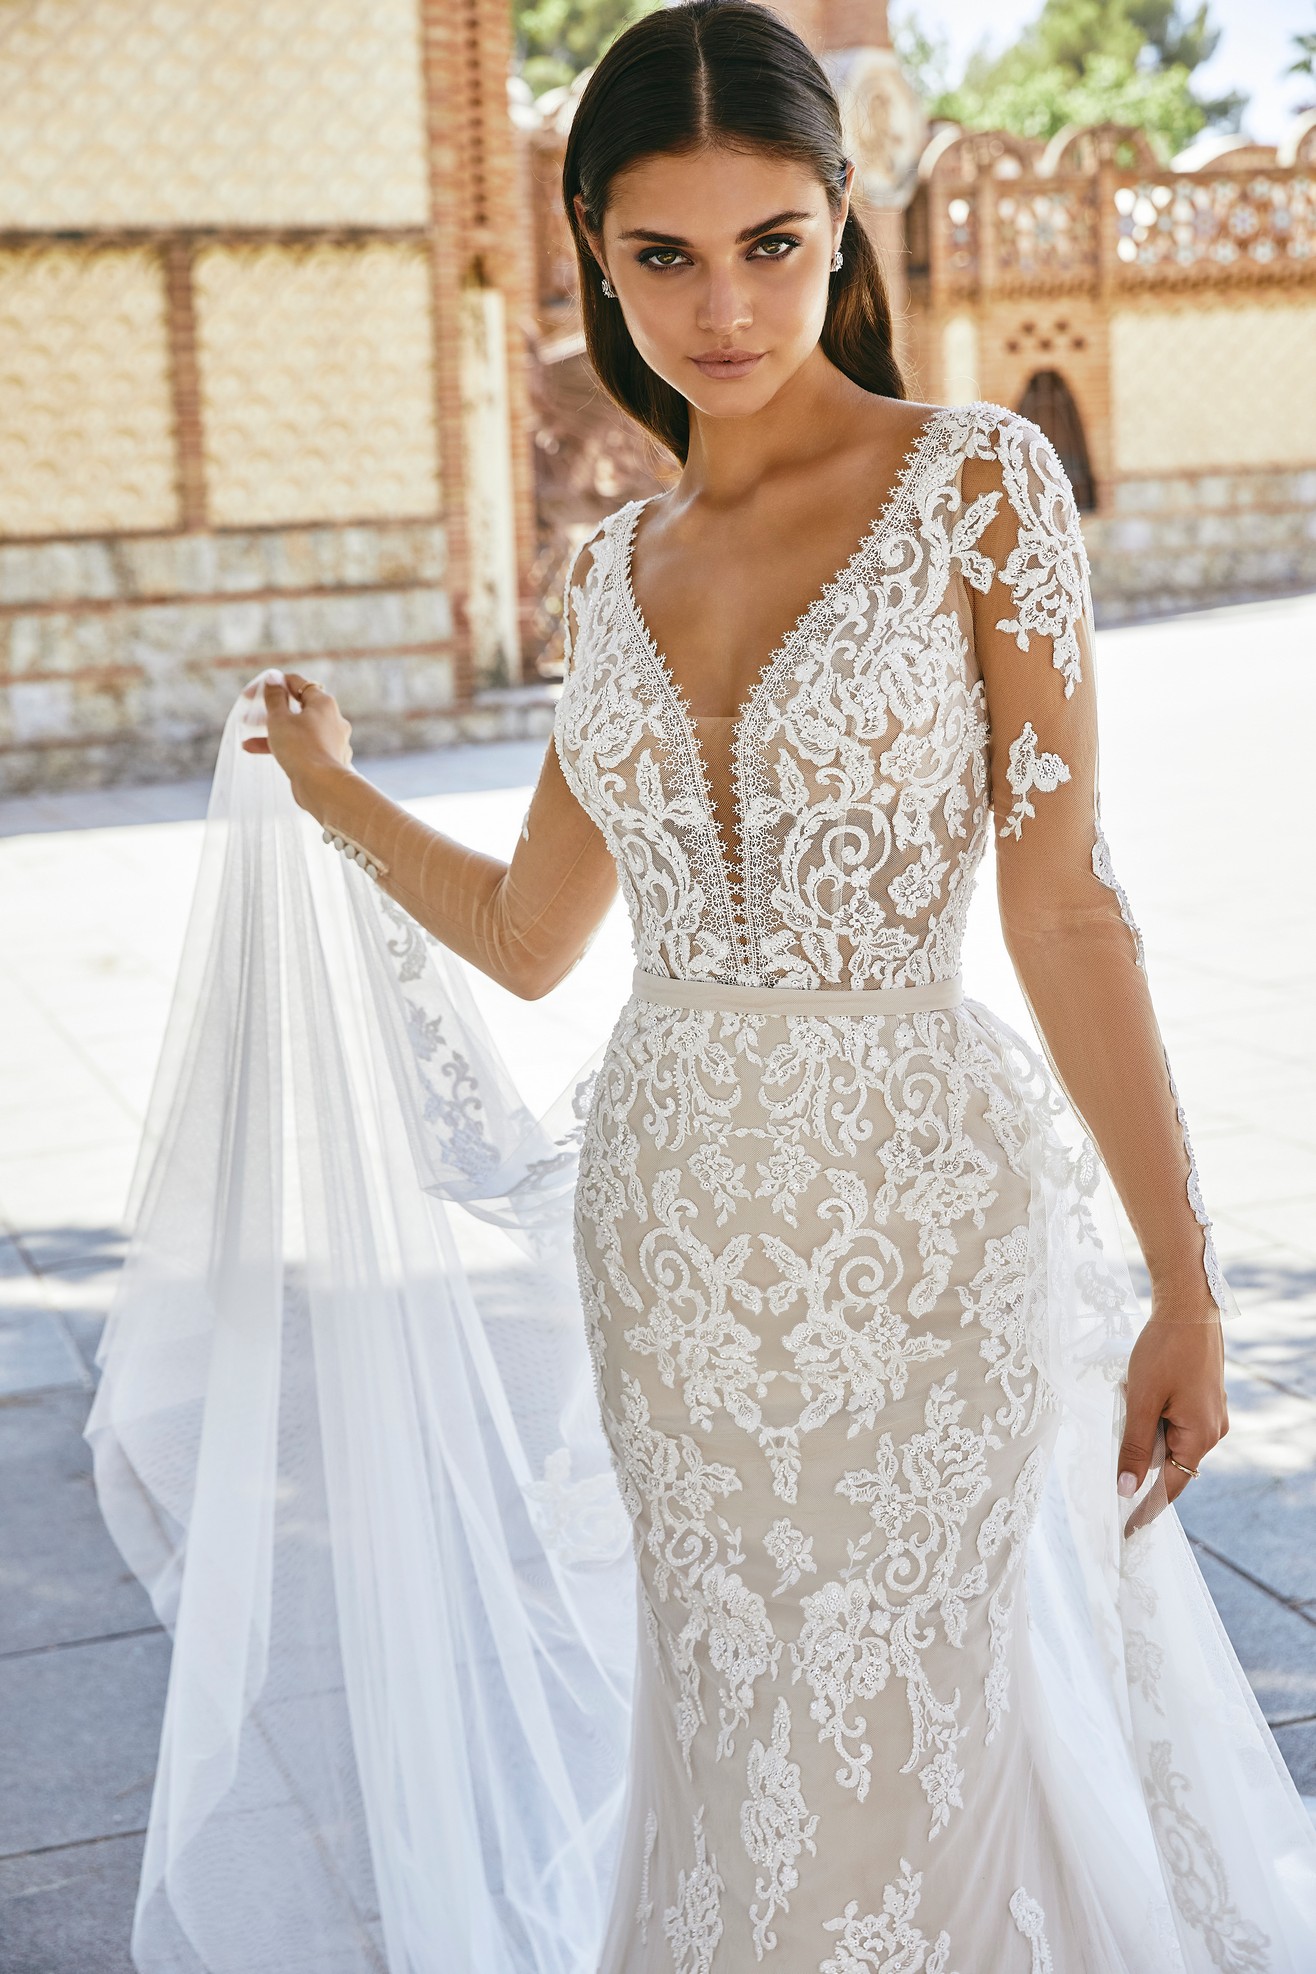 Close up of model wearing Ronald Joyce wedding dress style 69716, a tulle and lace applique fit and flare dress with long illusion sleeves and a v-shaped plunging neckline and back.